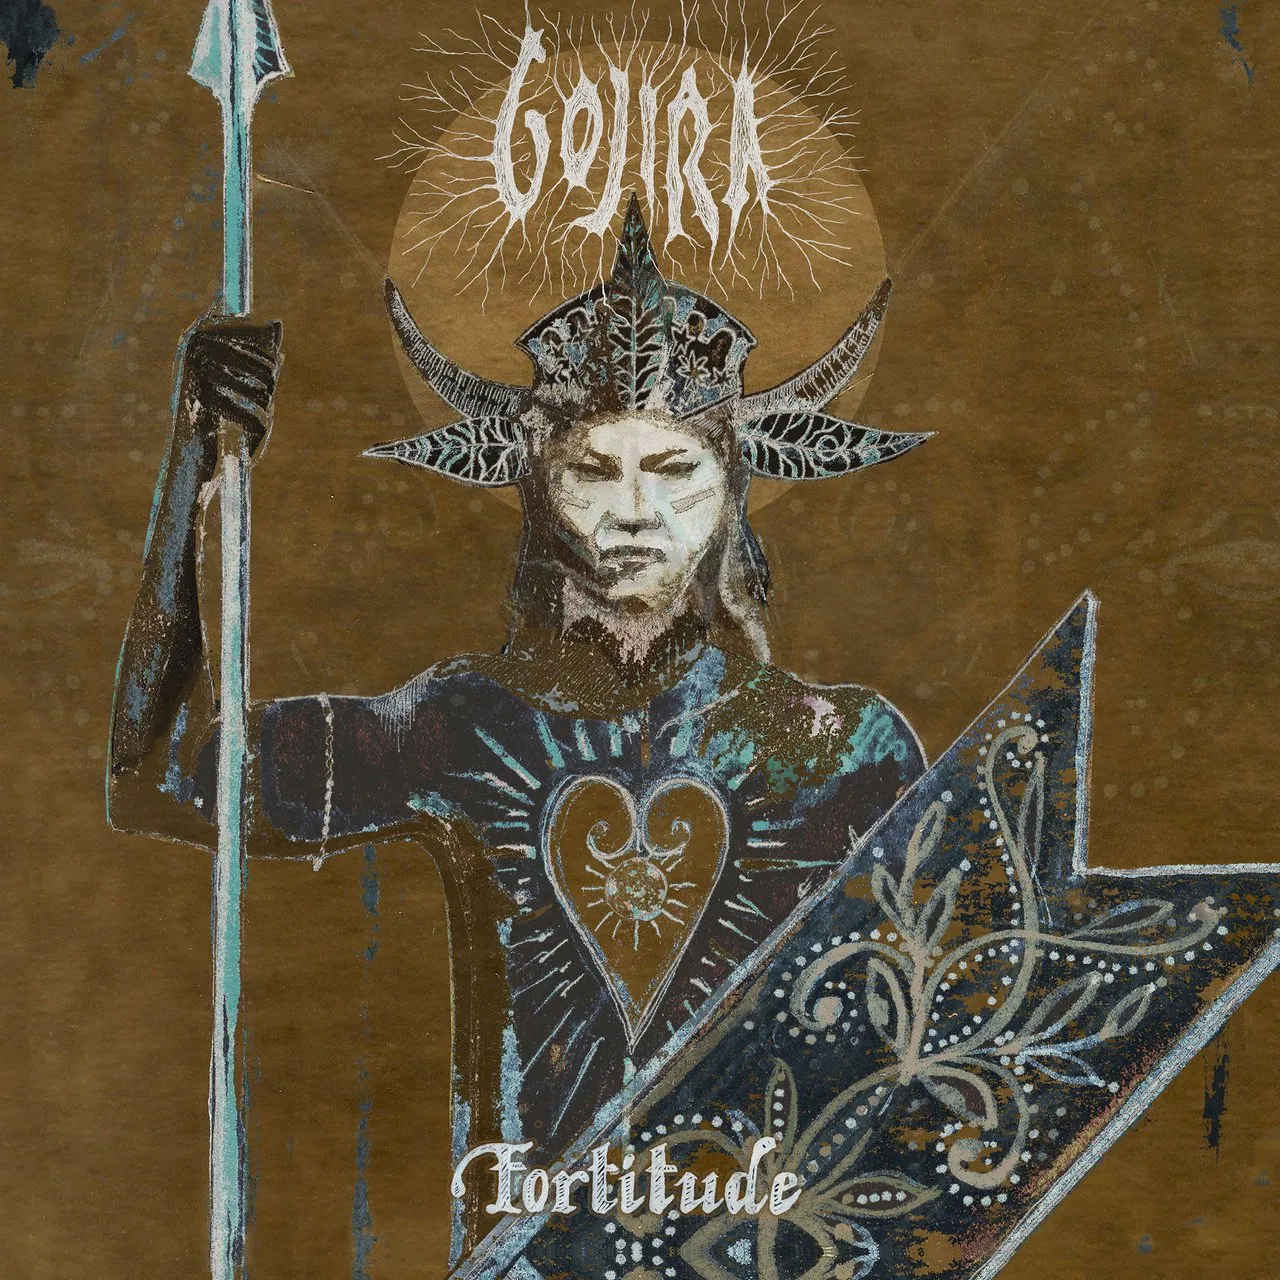 Cover art for the album by Joe Duplantier (the lead singer)